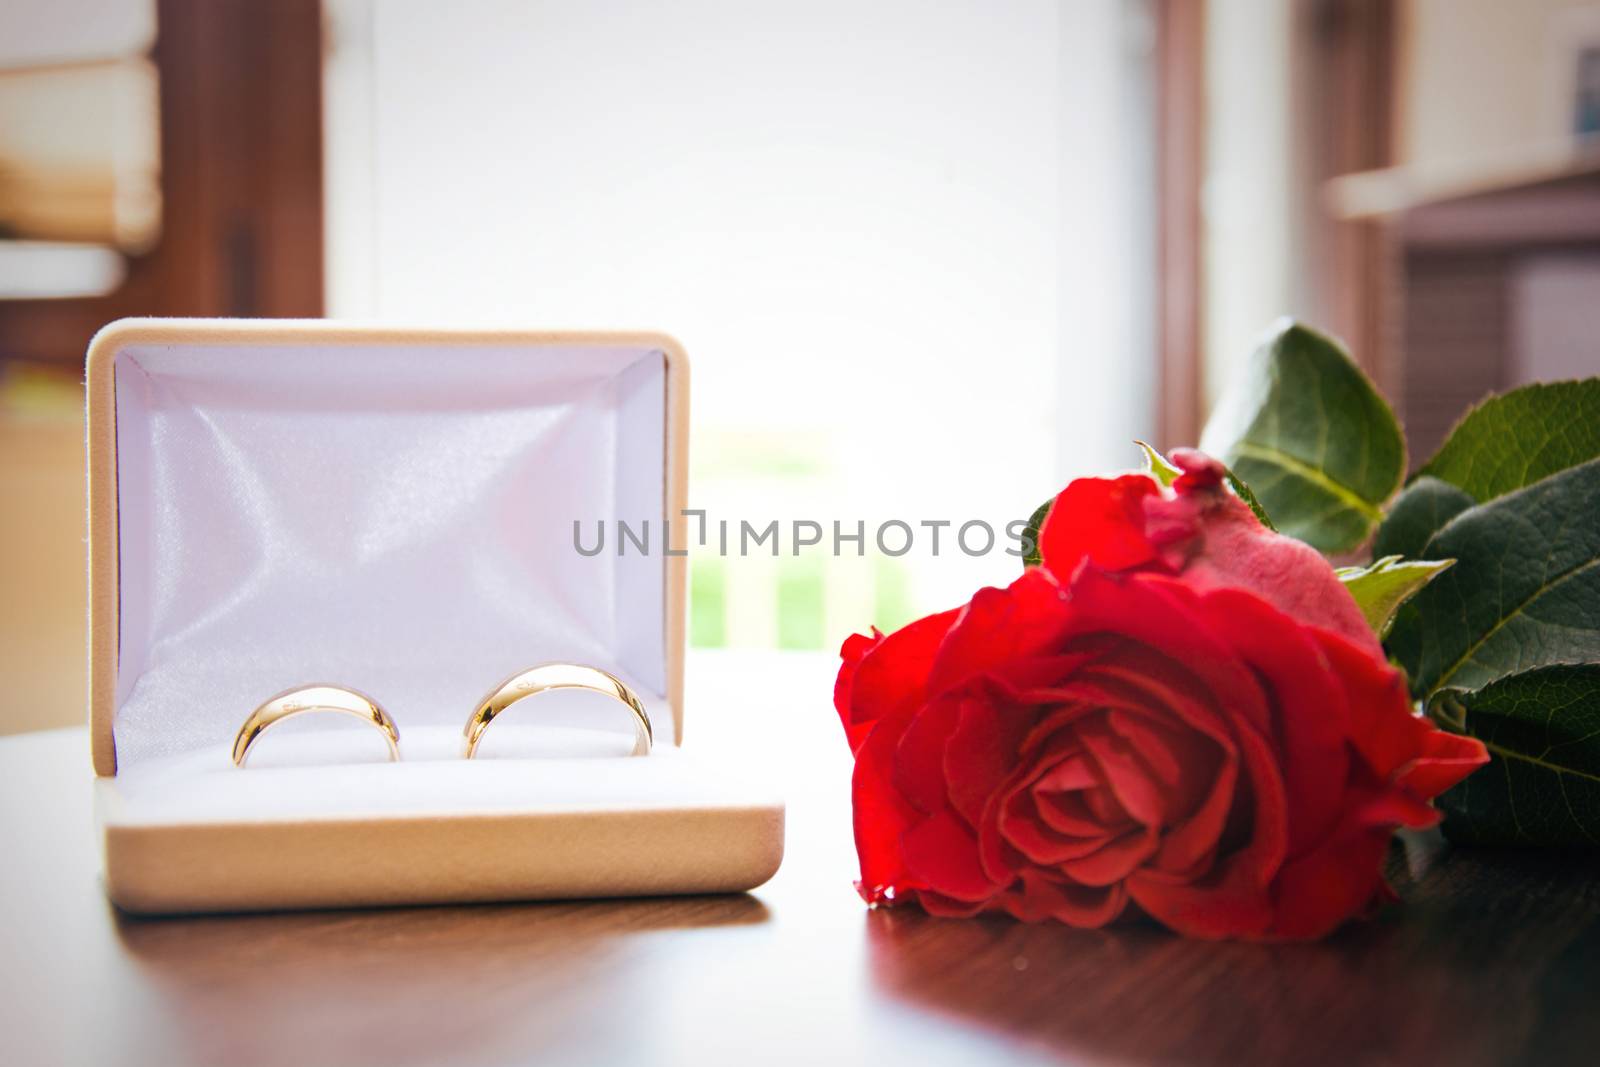 Wedding rings in the case for rings with red rose. Marriage and wedding concept image.